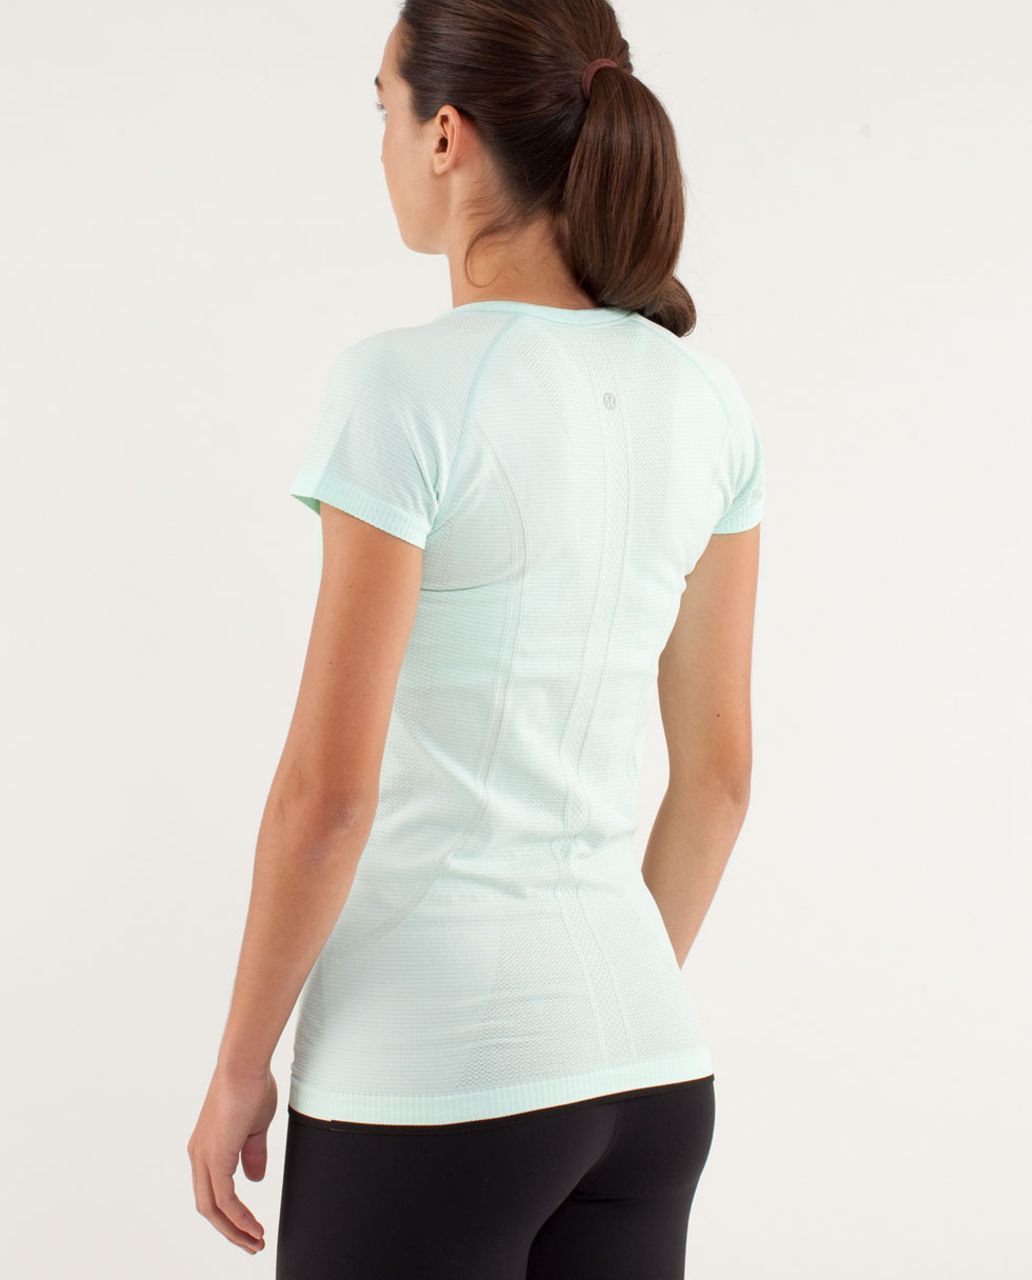 Felt a bright one today! Morning run outfit: swiftly ls neo mint